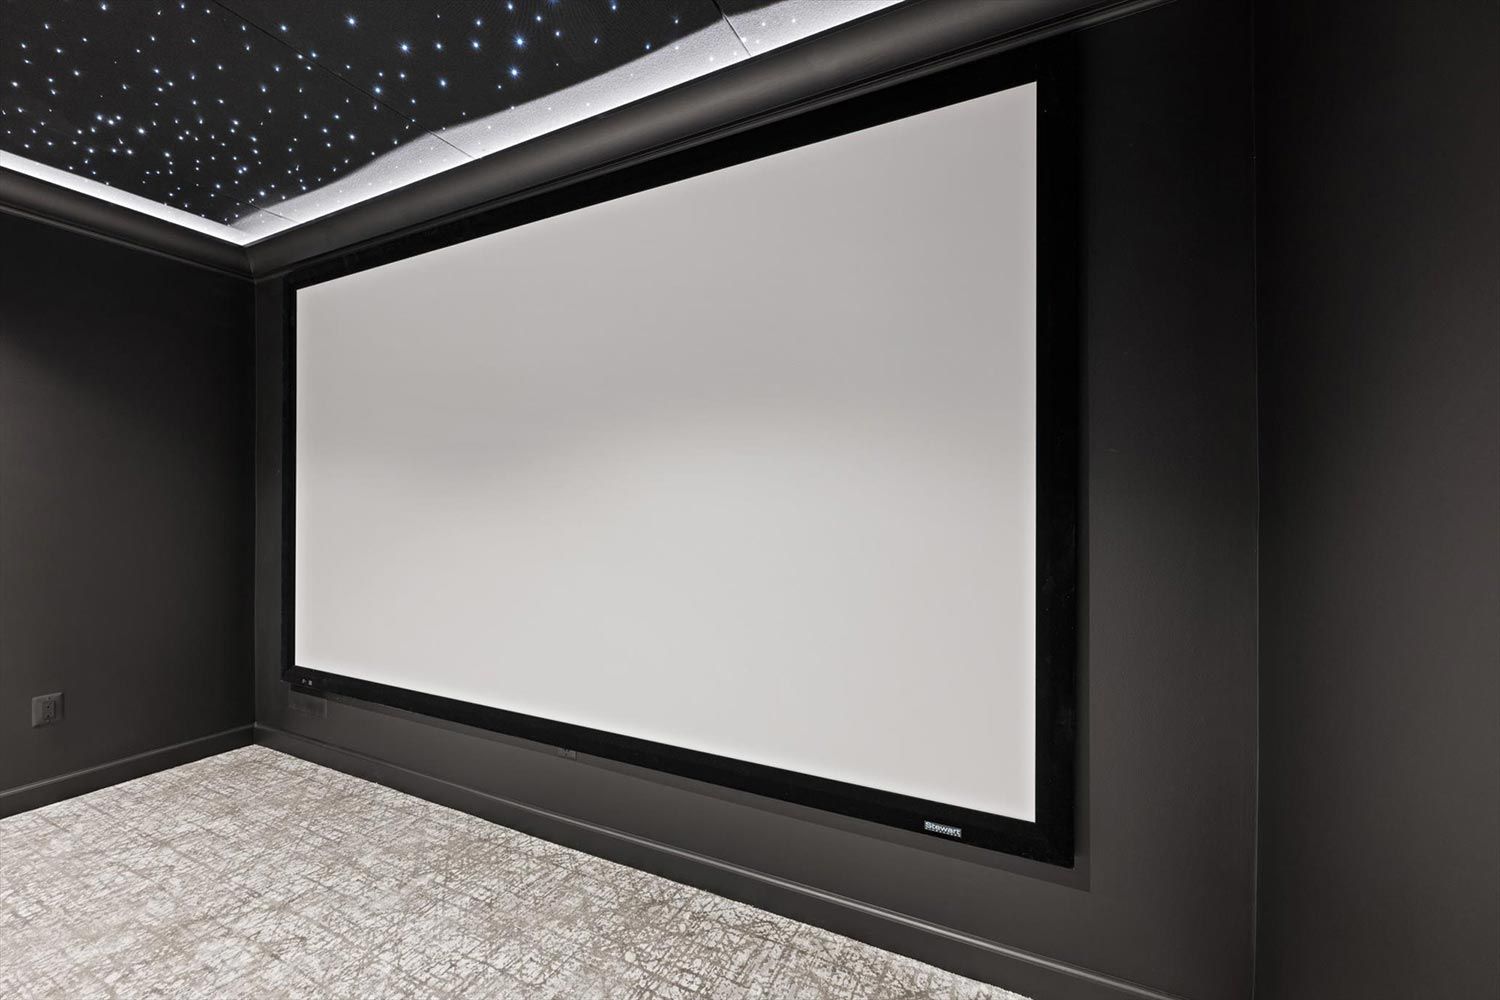 Spacious home theater room with a large projection screen, complemented by a ceiling that mimics a star-filled sky, creating an immersive viewing experience.